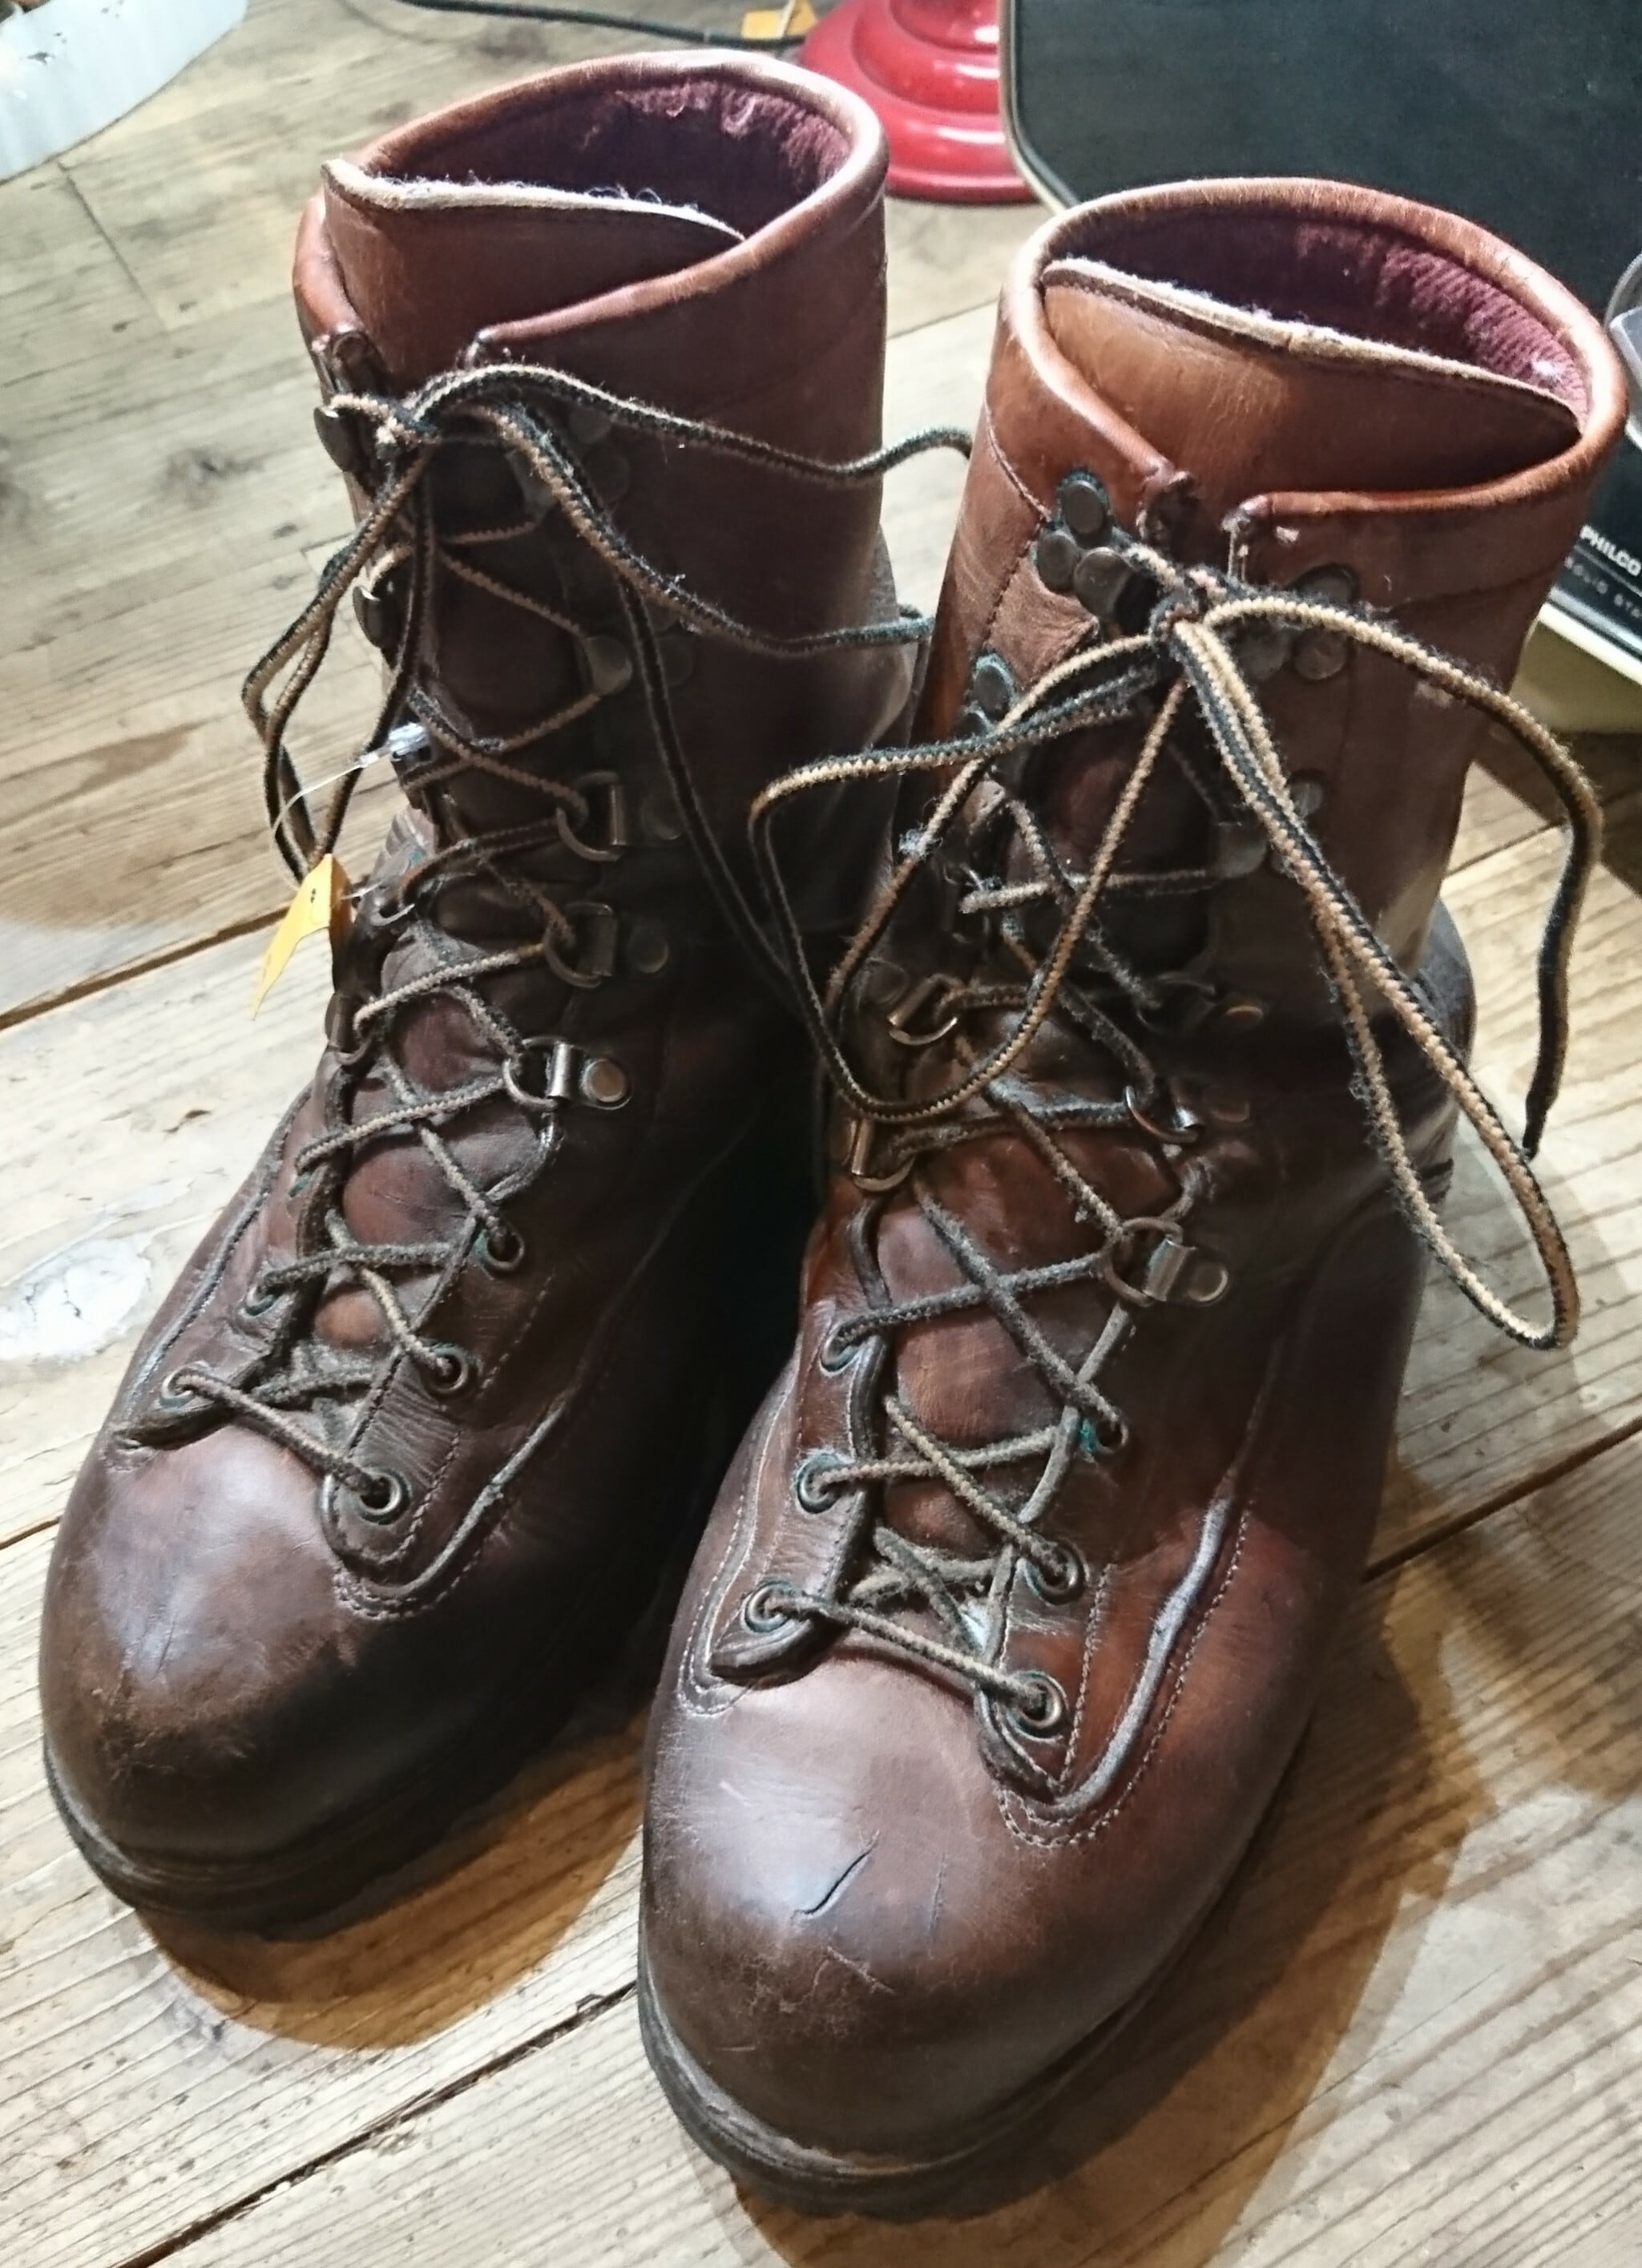 80s vintage danner boots leather 6042 ヴィンテージ ダナー ブーツ 